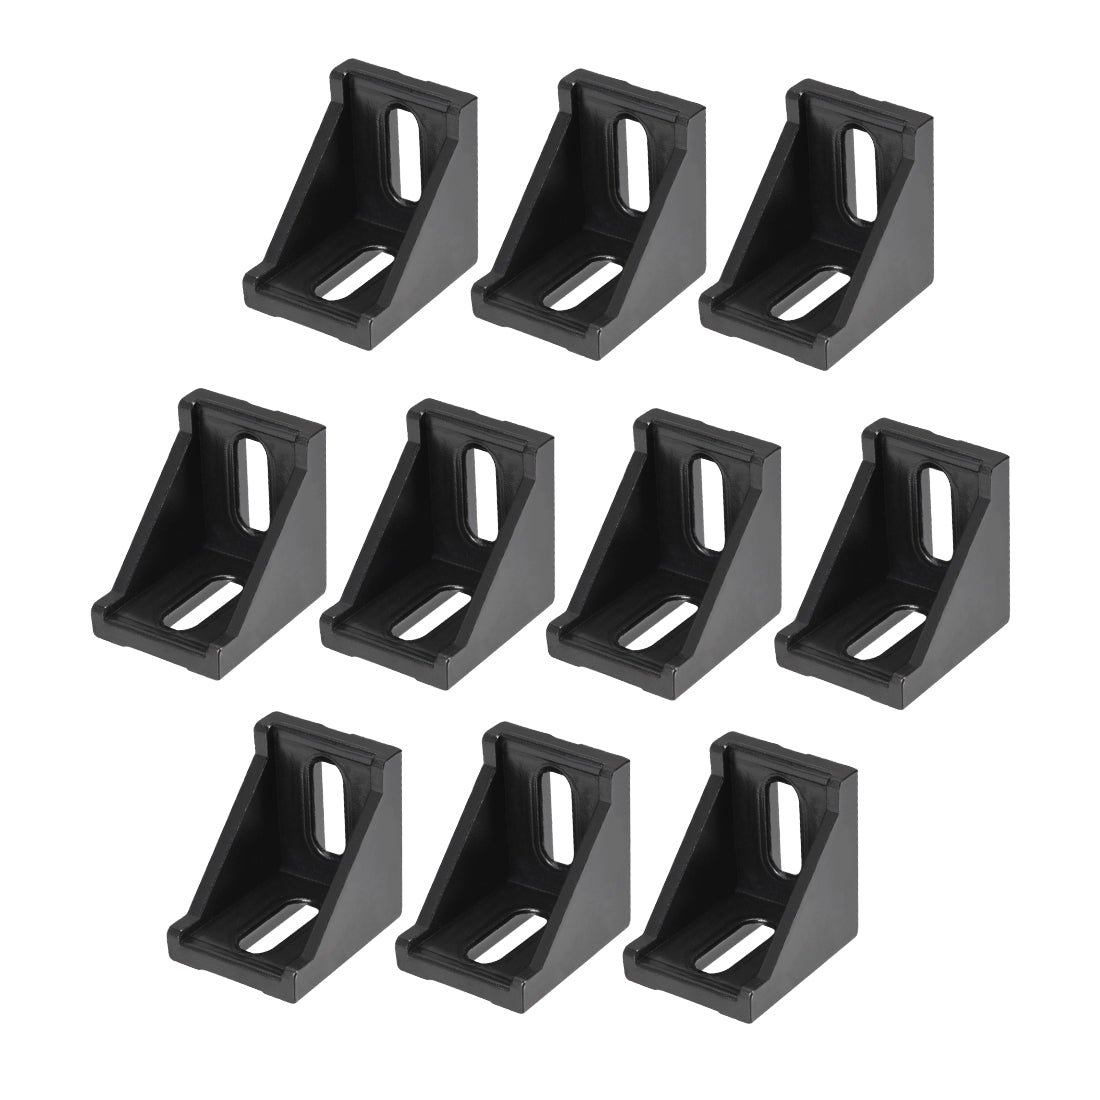 uxcell Uxcell Inside Corner Bracket Gusset, 35mm x 35mm for 3030 Series Aluminum Extrusion Profile with Slot 8mm, 10 Pcs (Black)